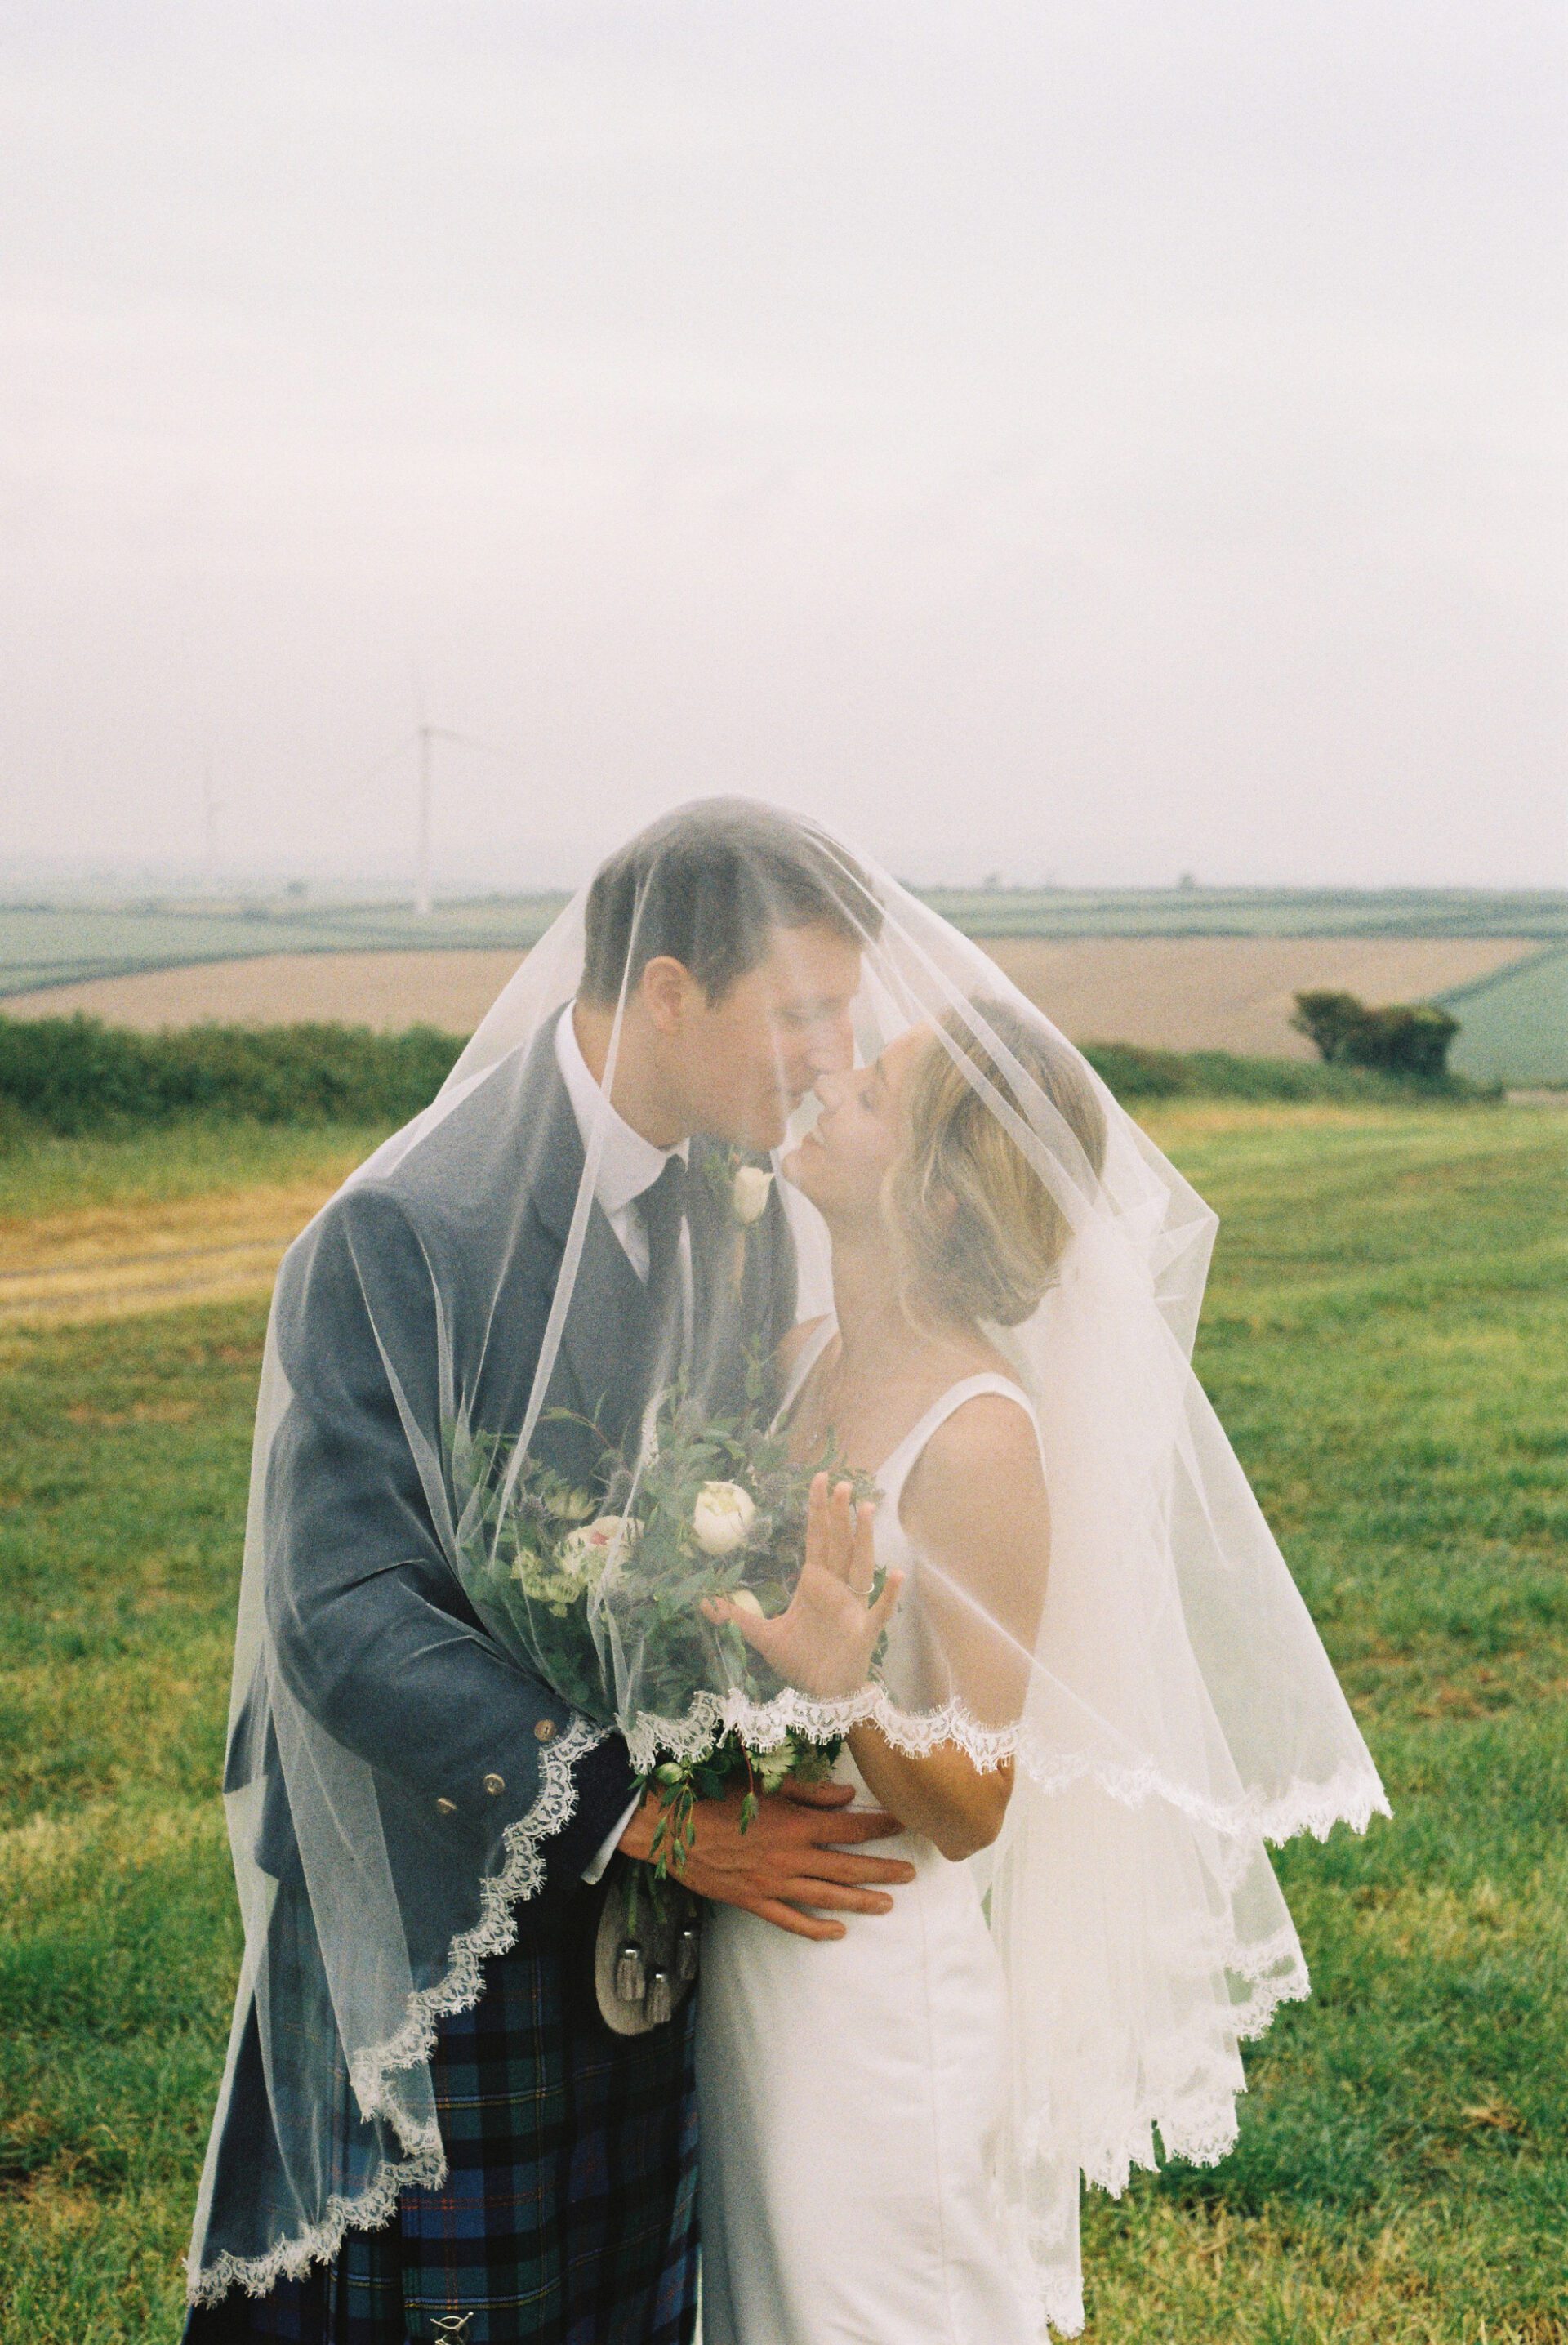 The bride and groom share a kiss beneath a veil, captured on 35mm film